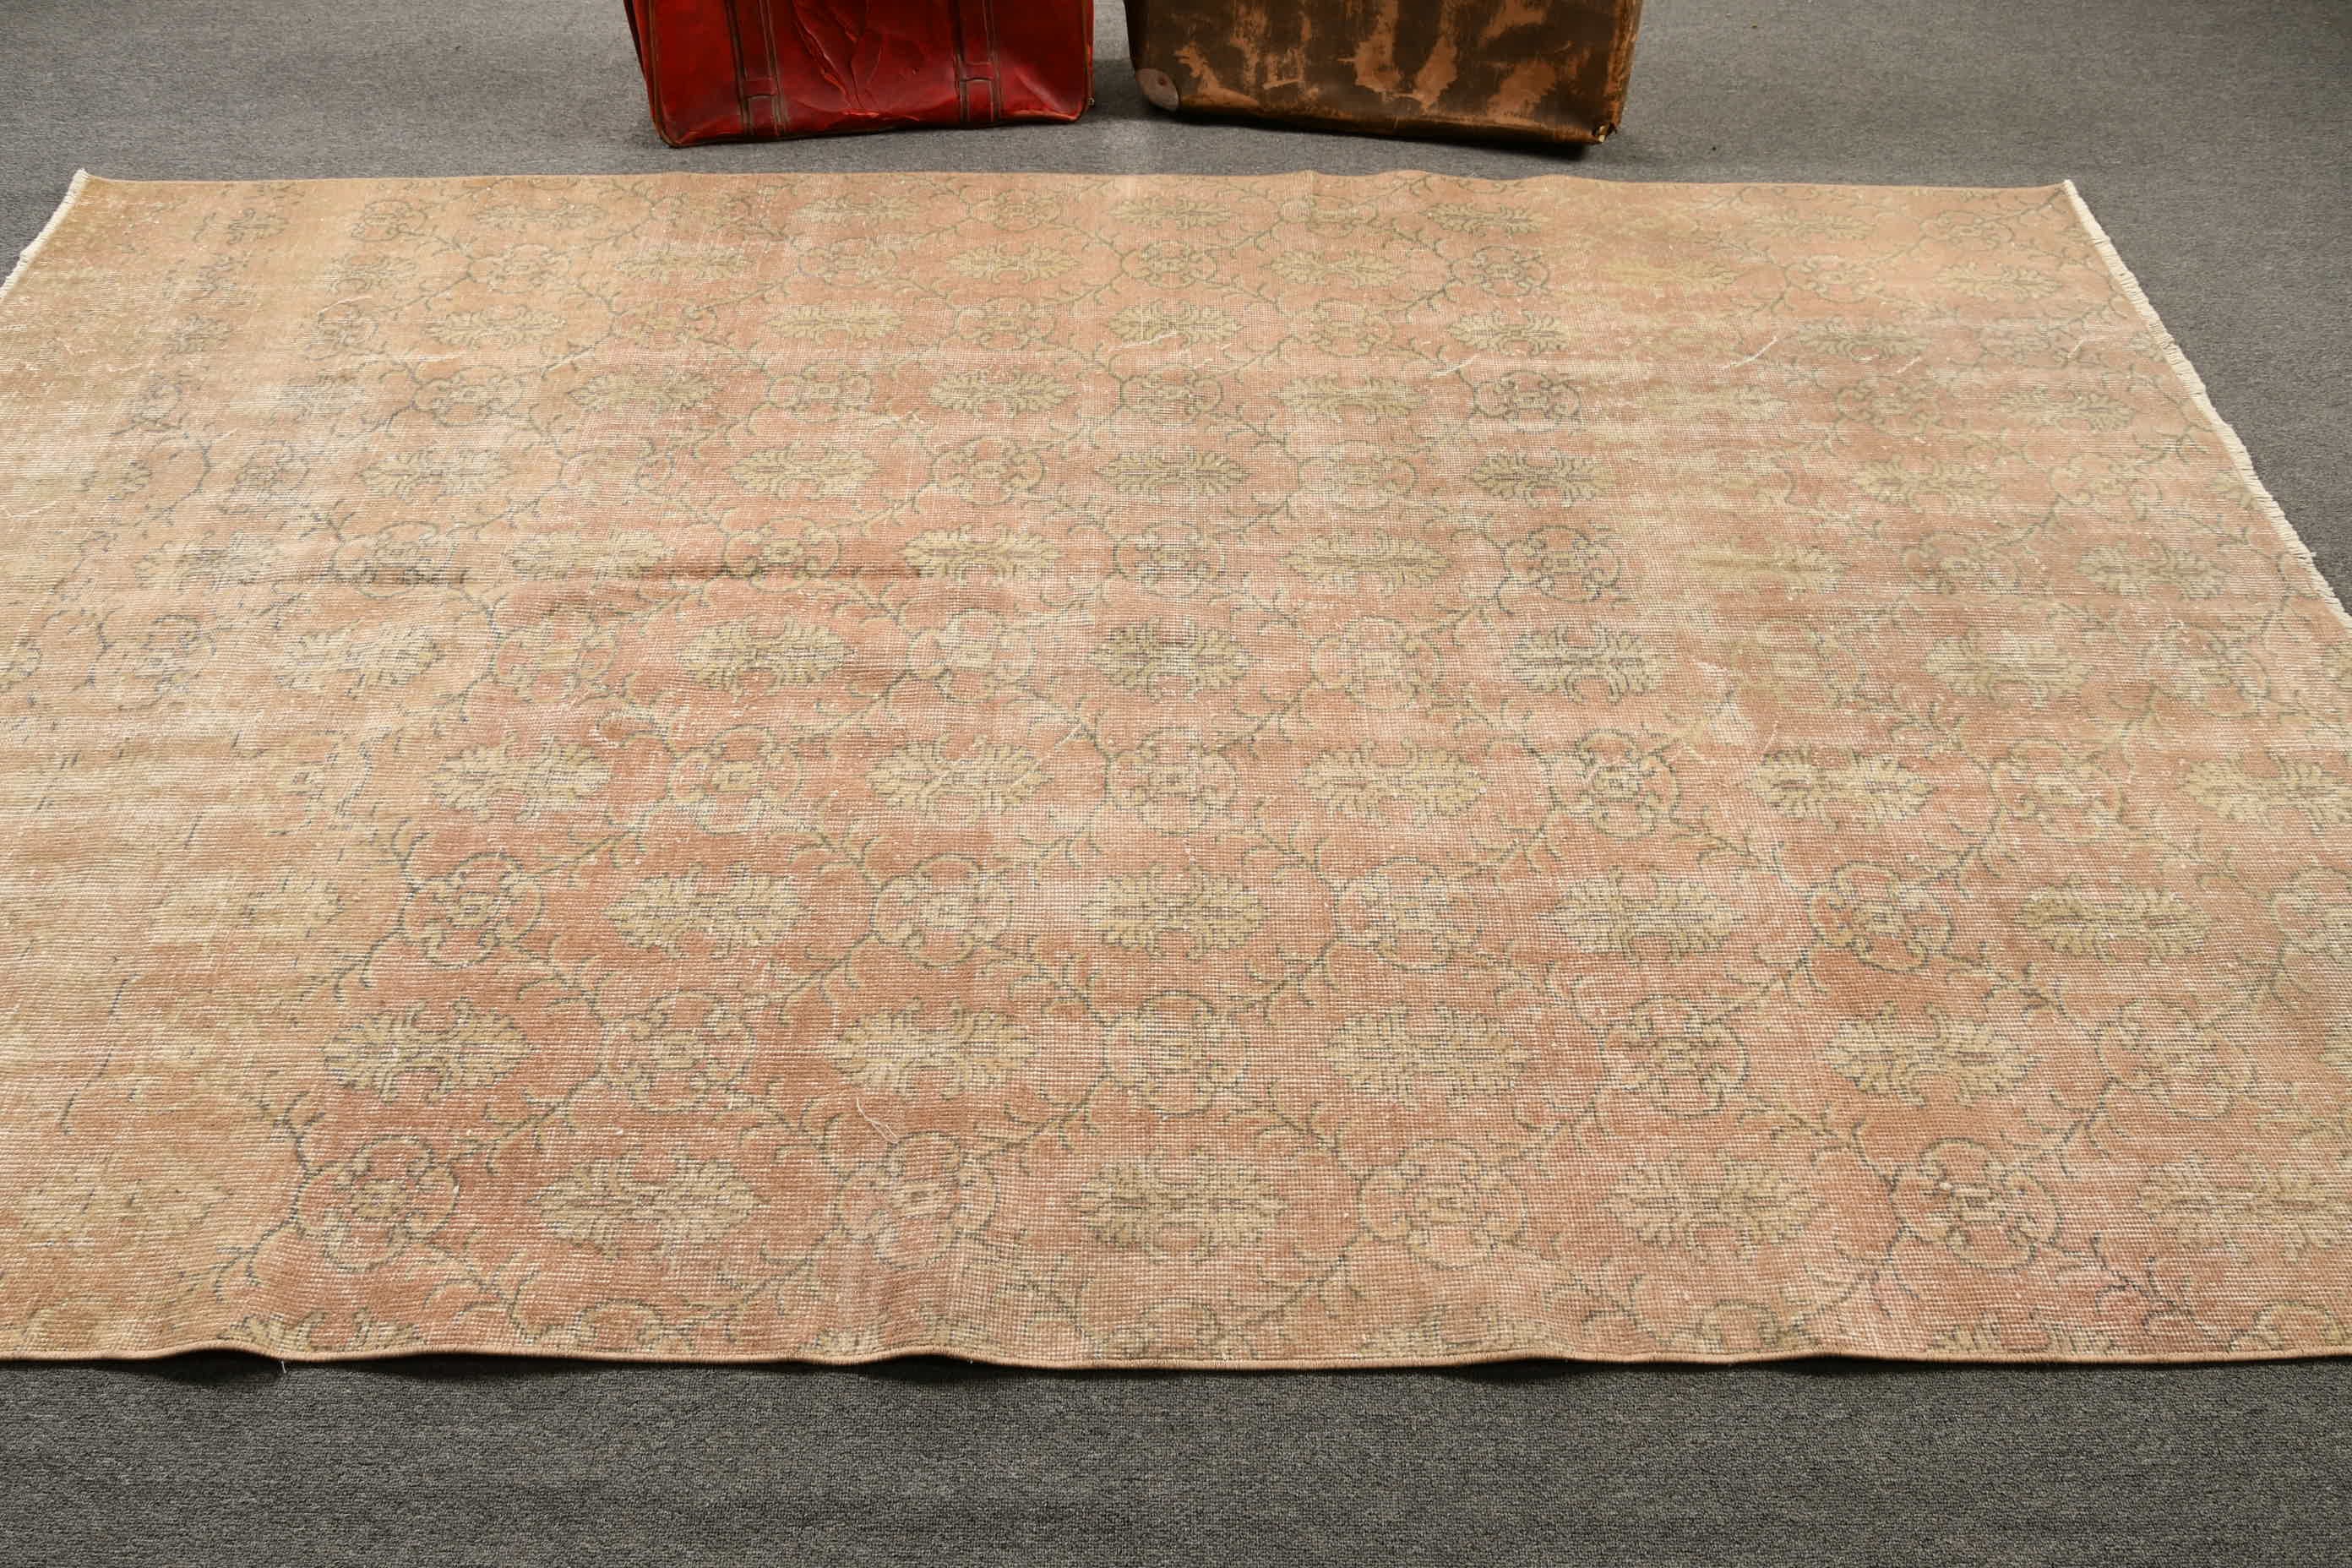 Antique Rug, Dining Room Rug, Red Home Decor Rug, Vintage Rug, Cool Rug, Turkish Rugs, 5.8x9.1 ft Large Rugs, Rugs for Salon, Bedroom Rugs